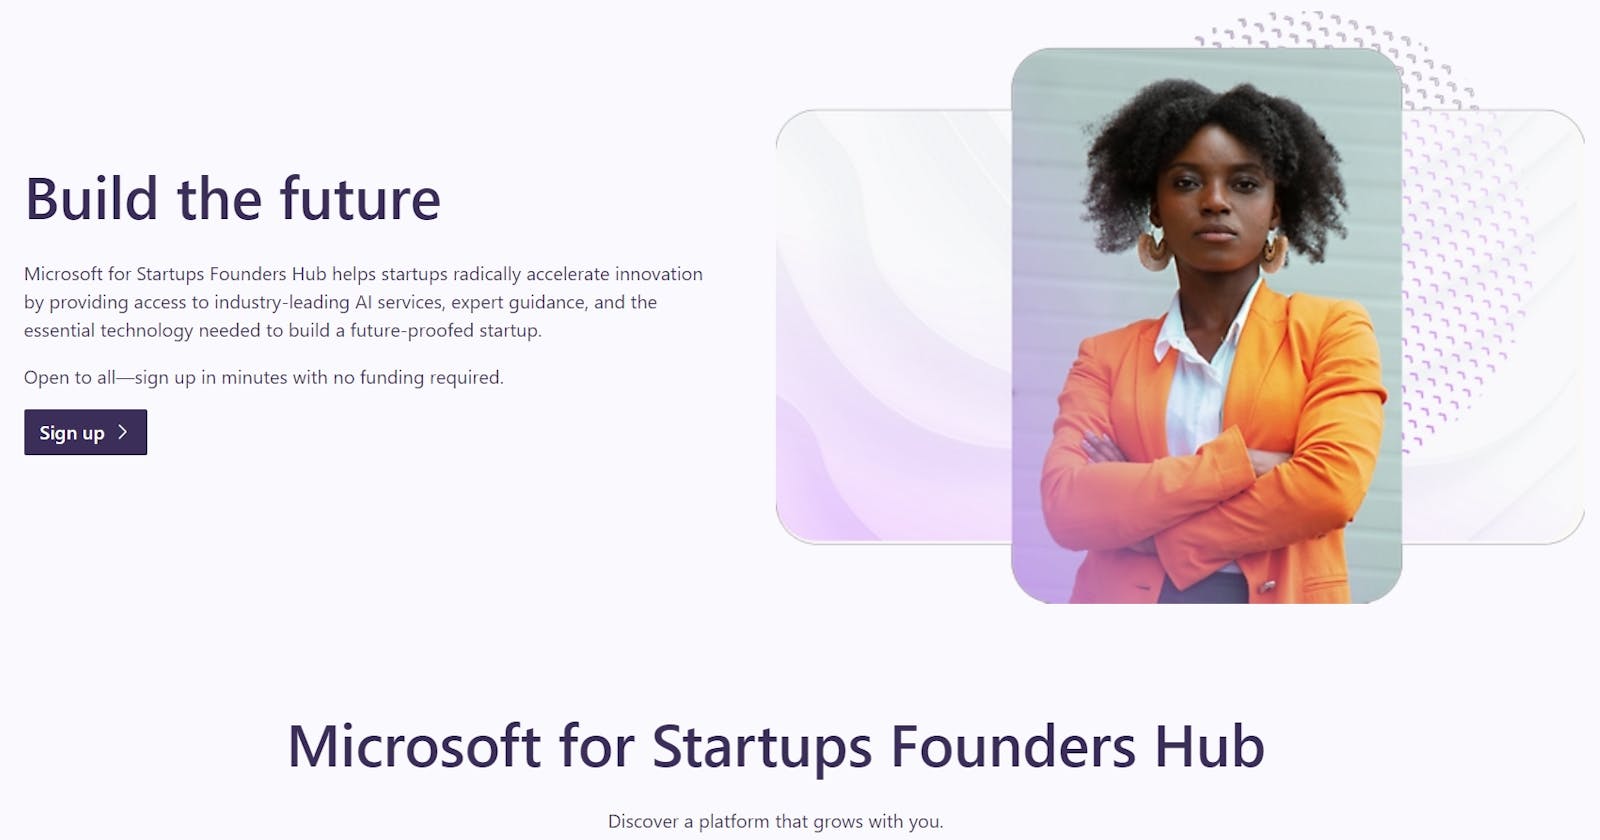 Startup Journey with Microsoft for Startups Founders Hub